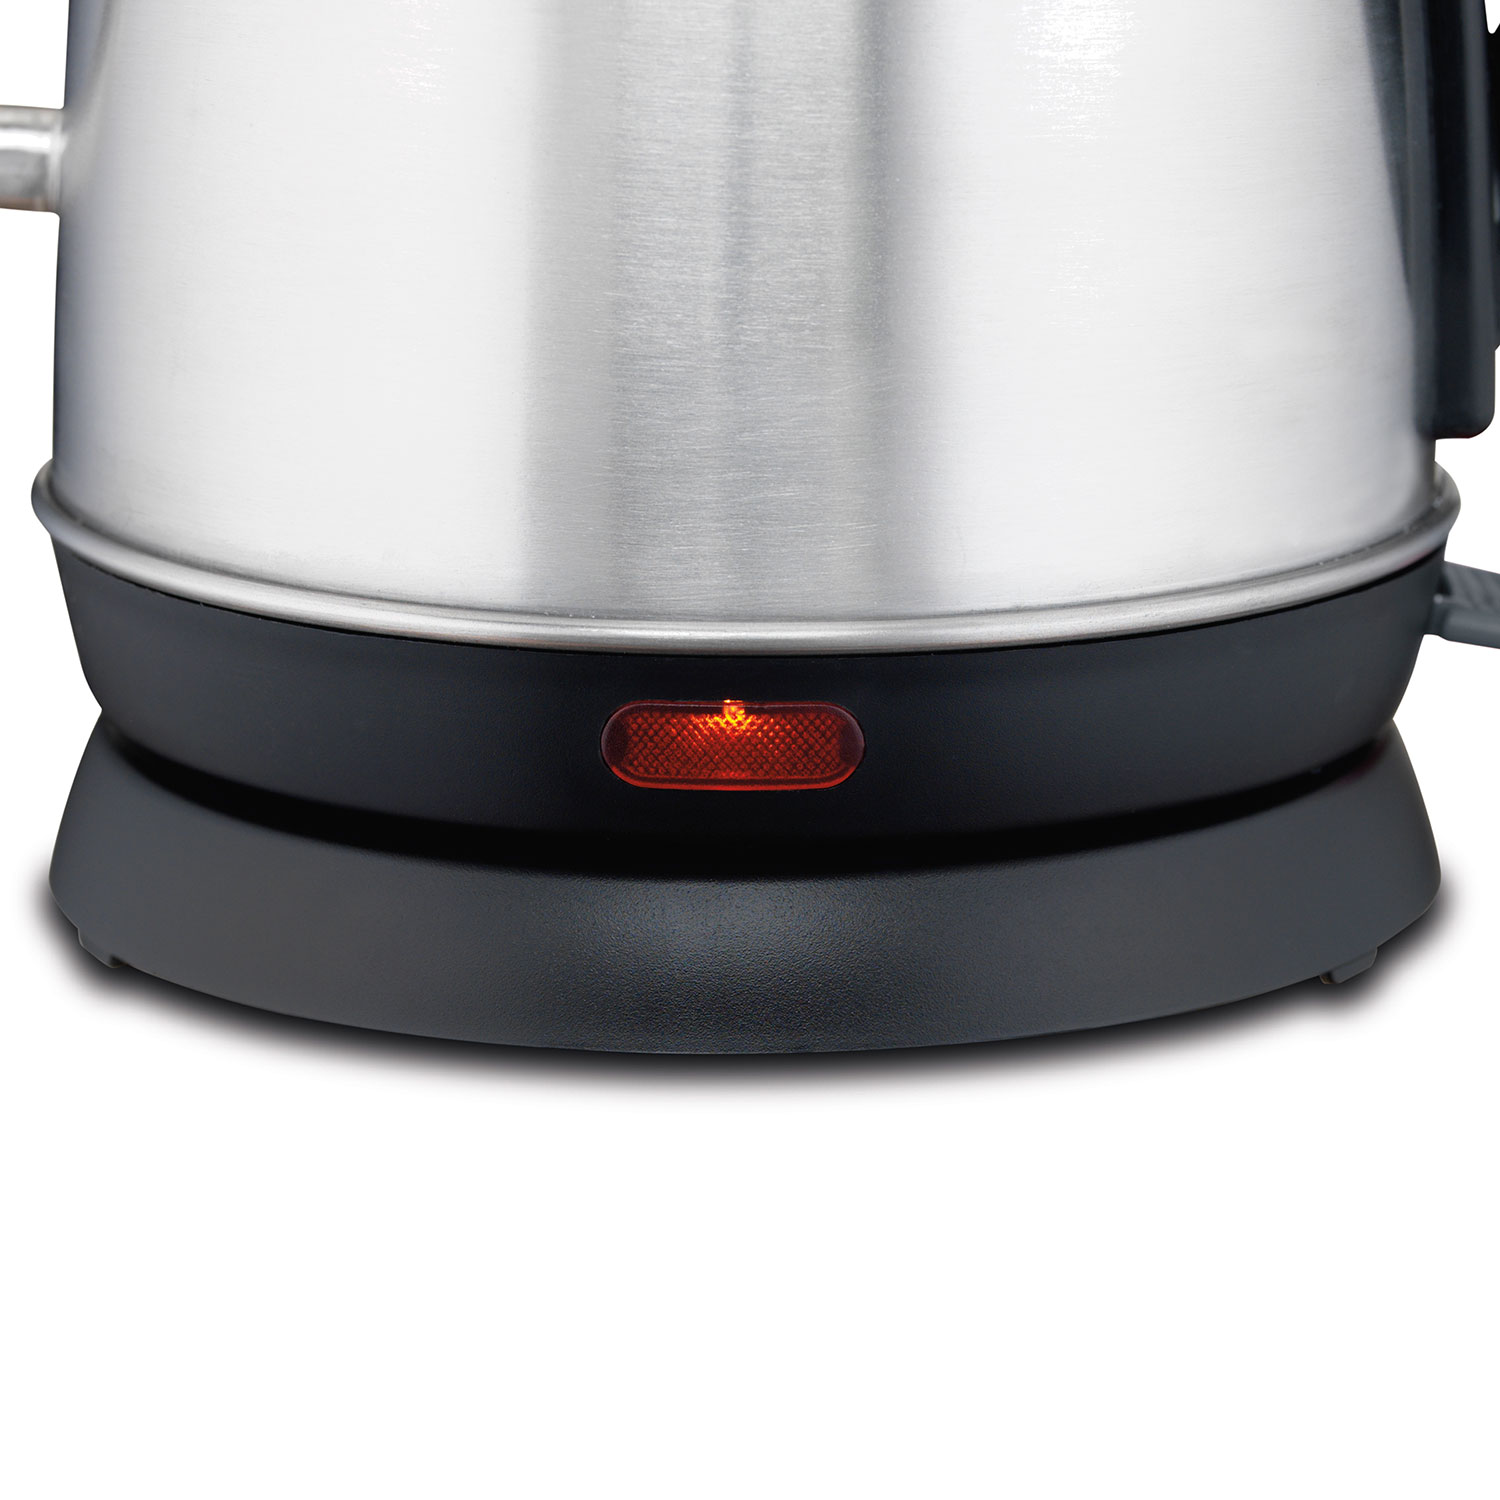 Electric 1.2 Liter Gooseneck Kettle with 1.2 liter capacity.